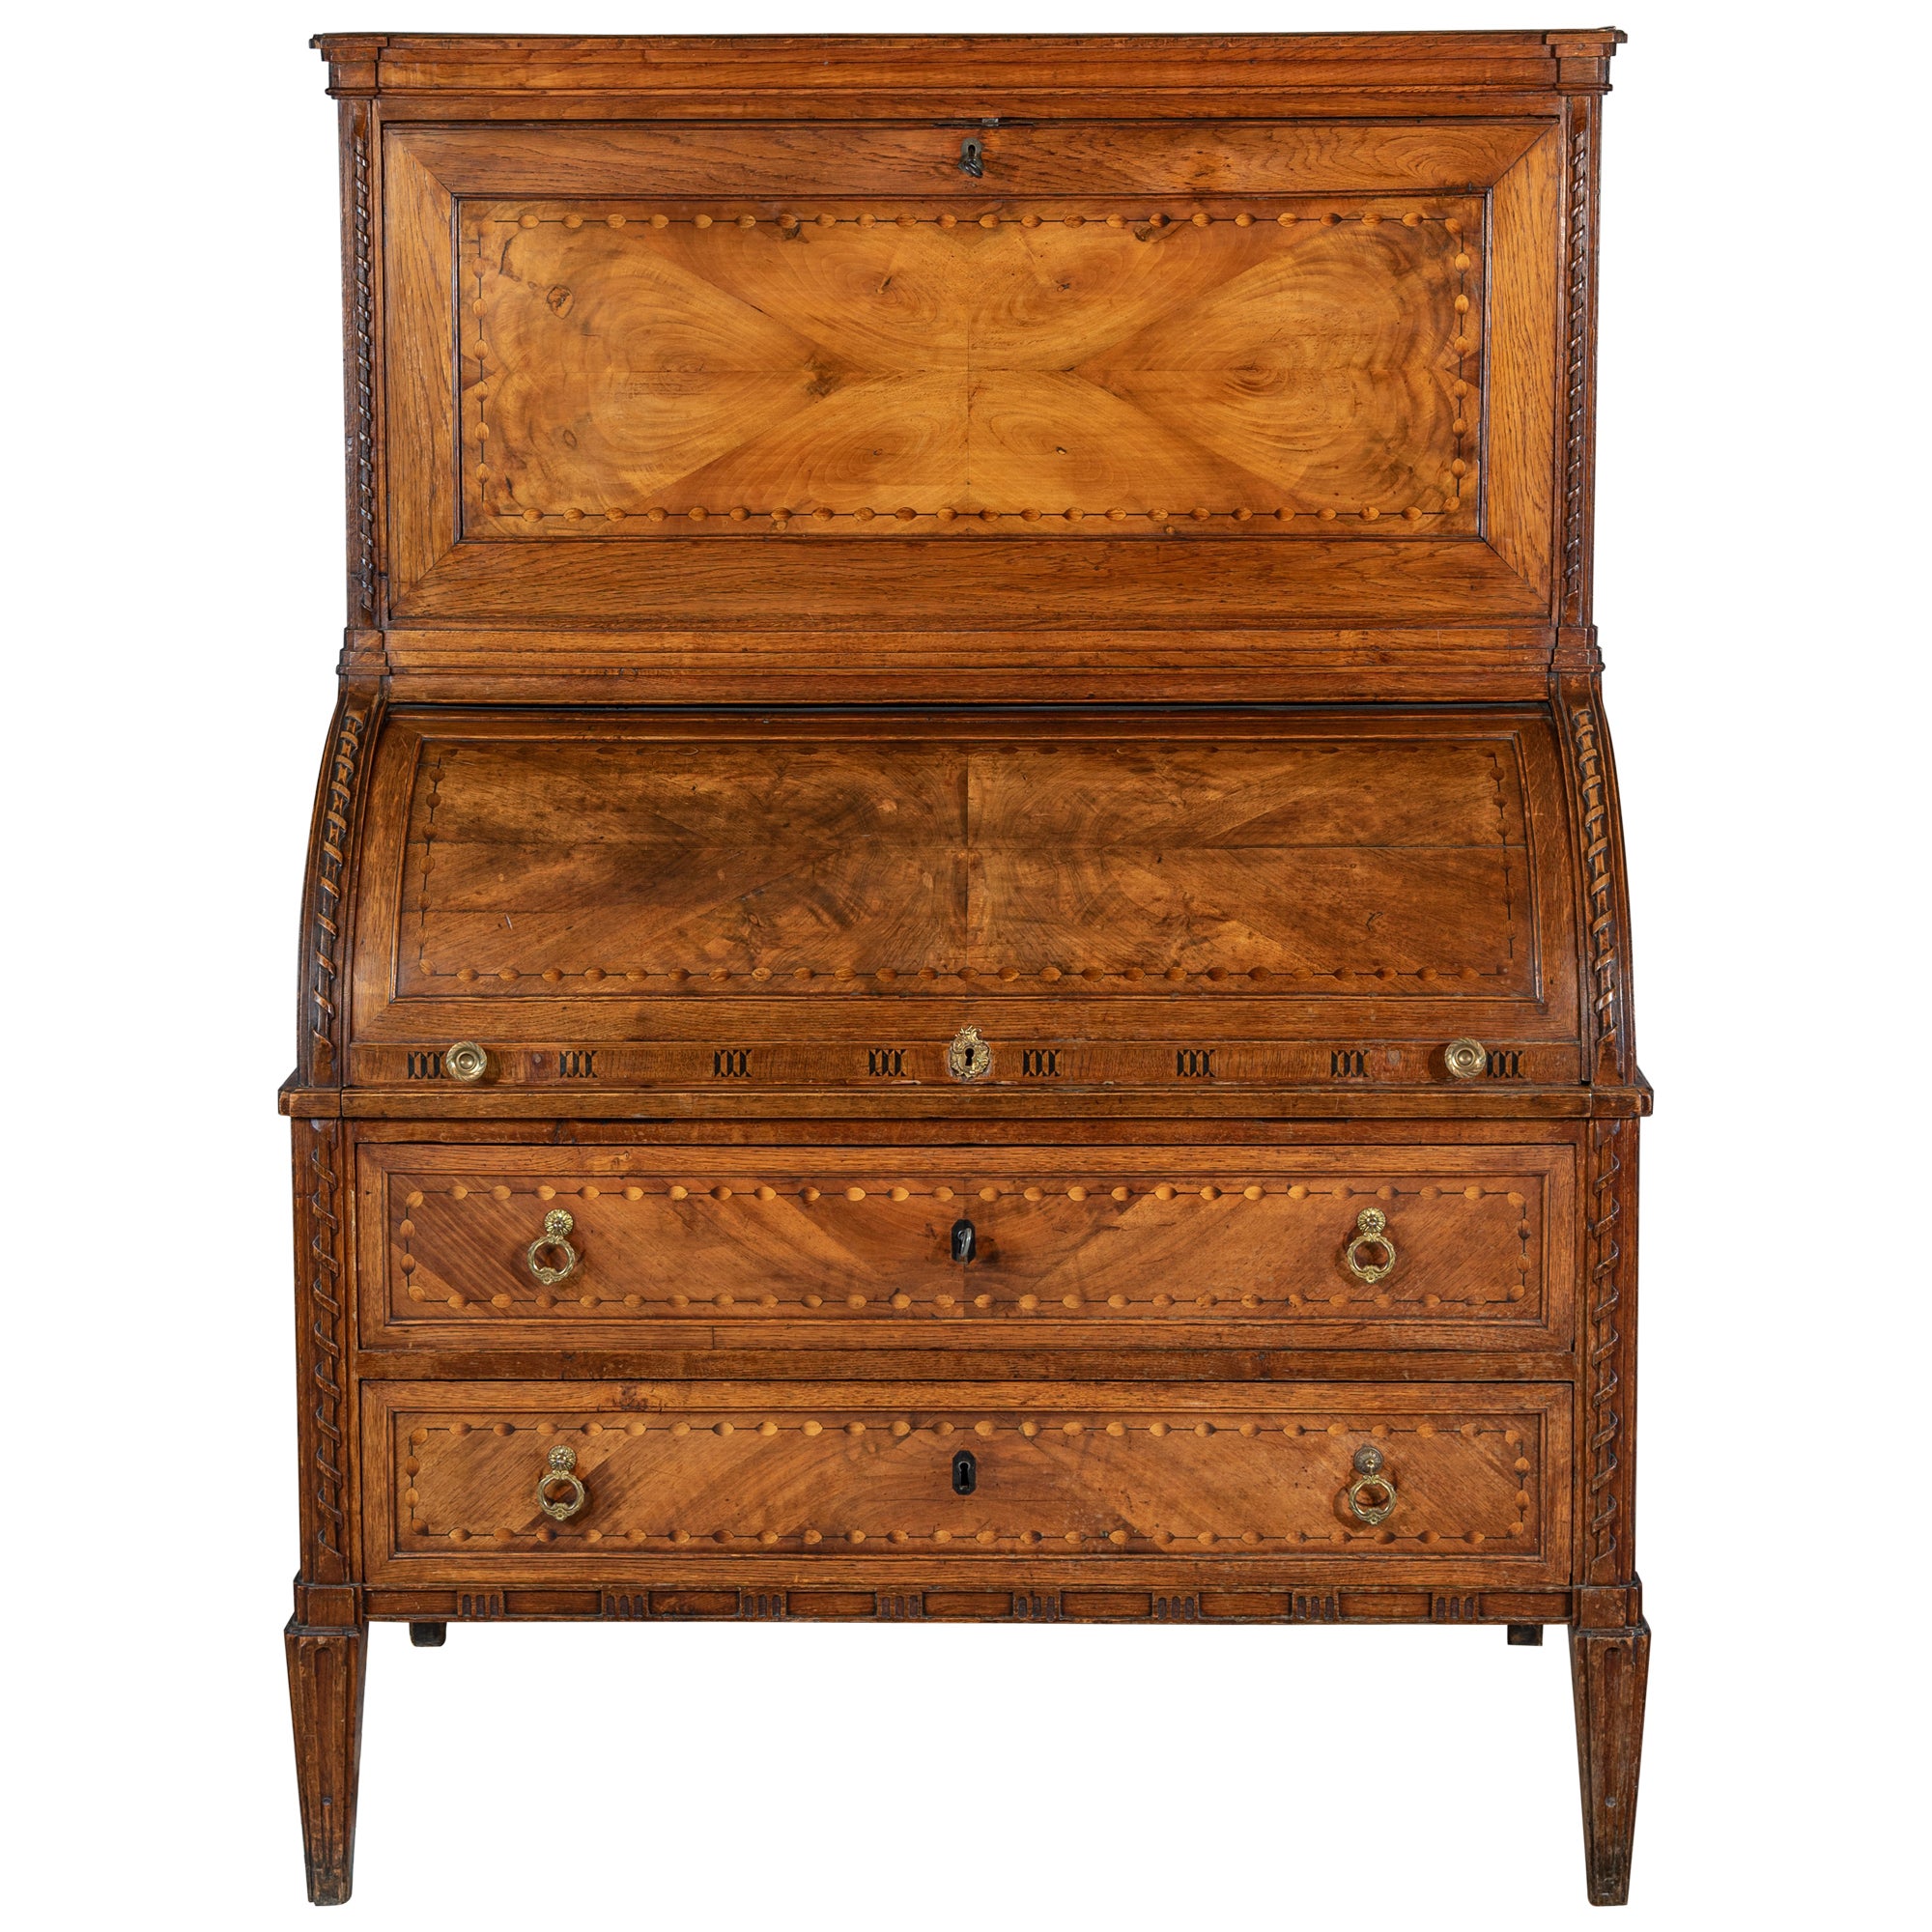 French 18th Century Louis XVI Period Marquetry Desk For Sale